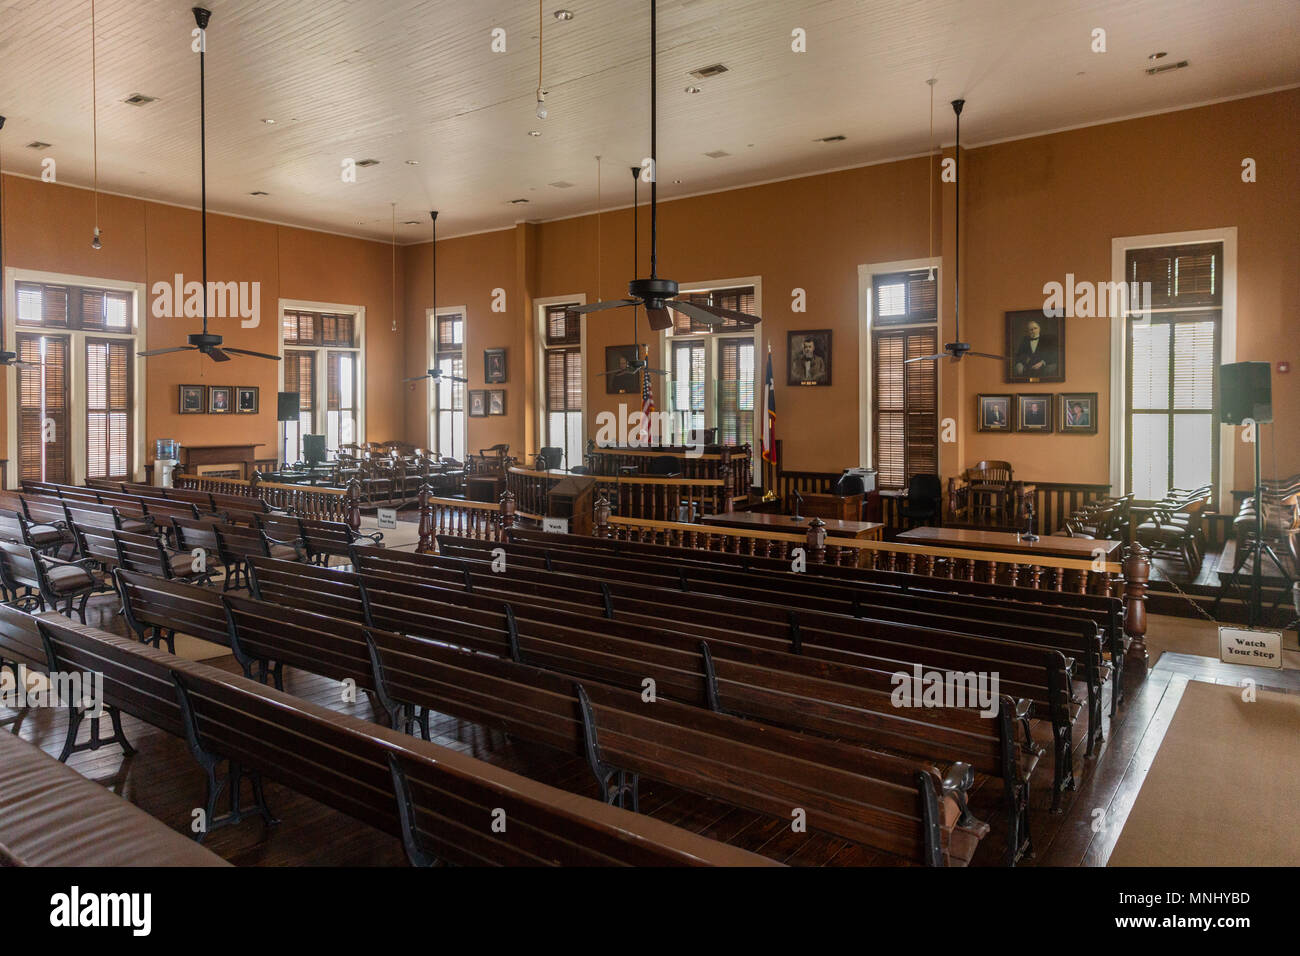 Historic District Courtroom in Leon County Courthouse located in Centerville Texas Stock Photo